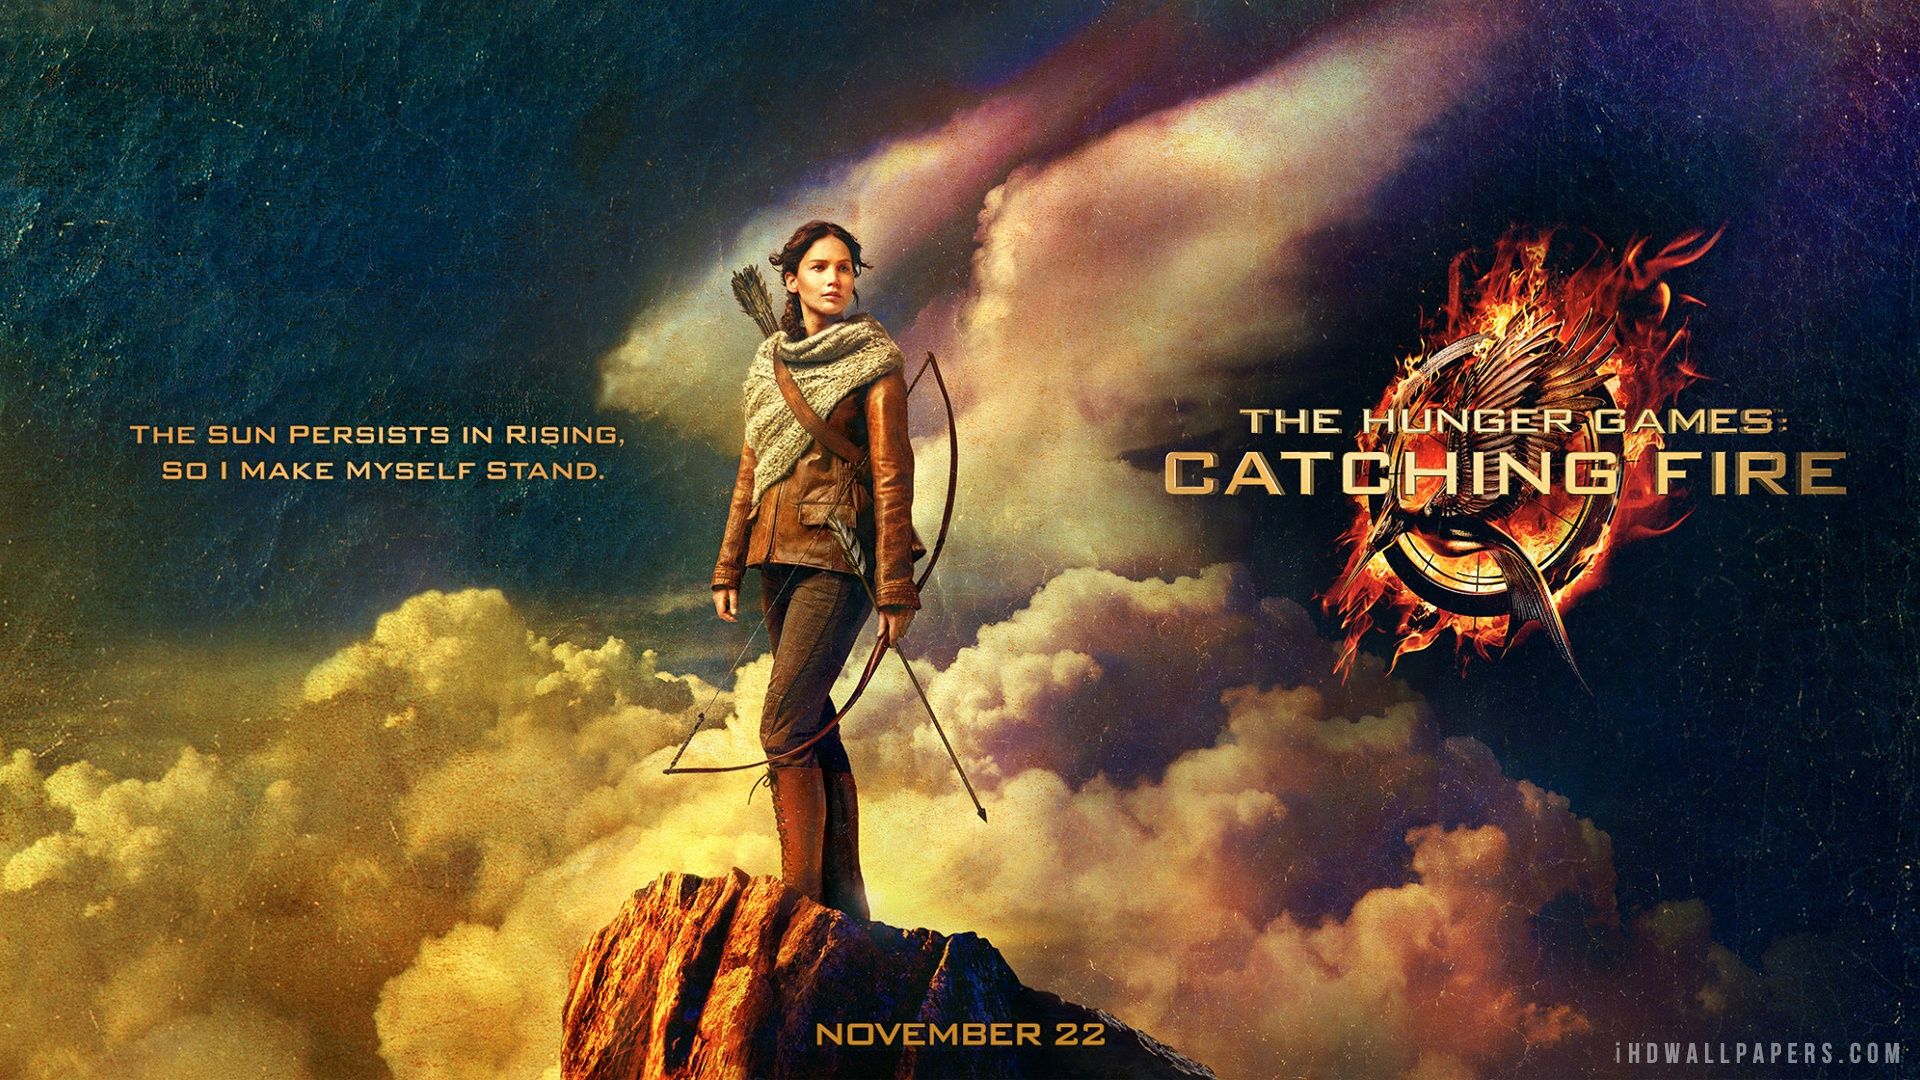 The Hunger Games Catching Fire 2013 HD Wallpaper - iHD Wallpapers